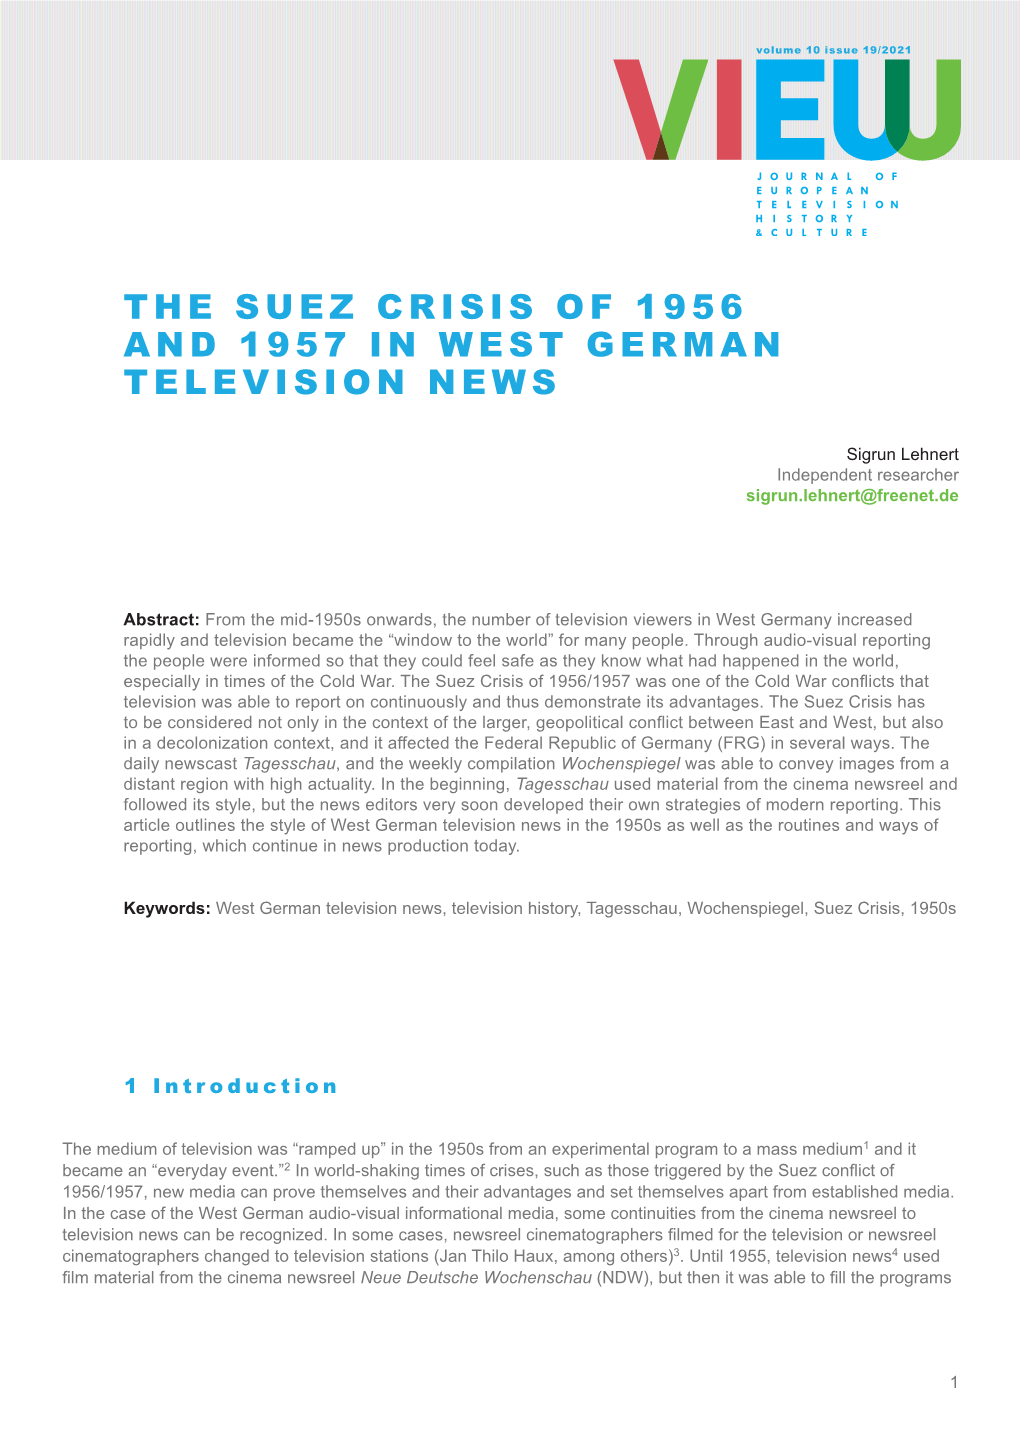 The Suez Crisis of 1956 and 1957 in West German Television News